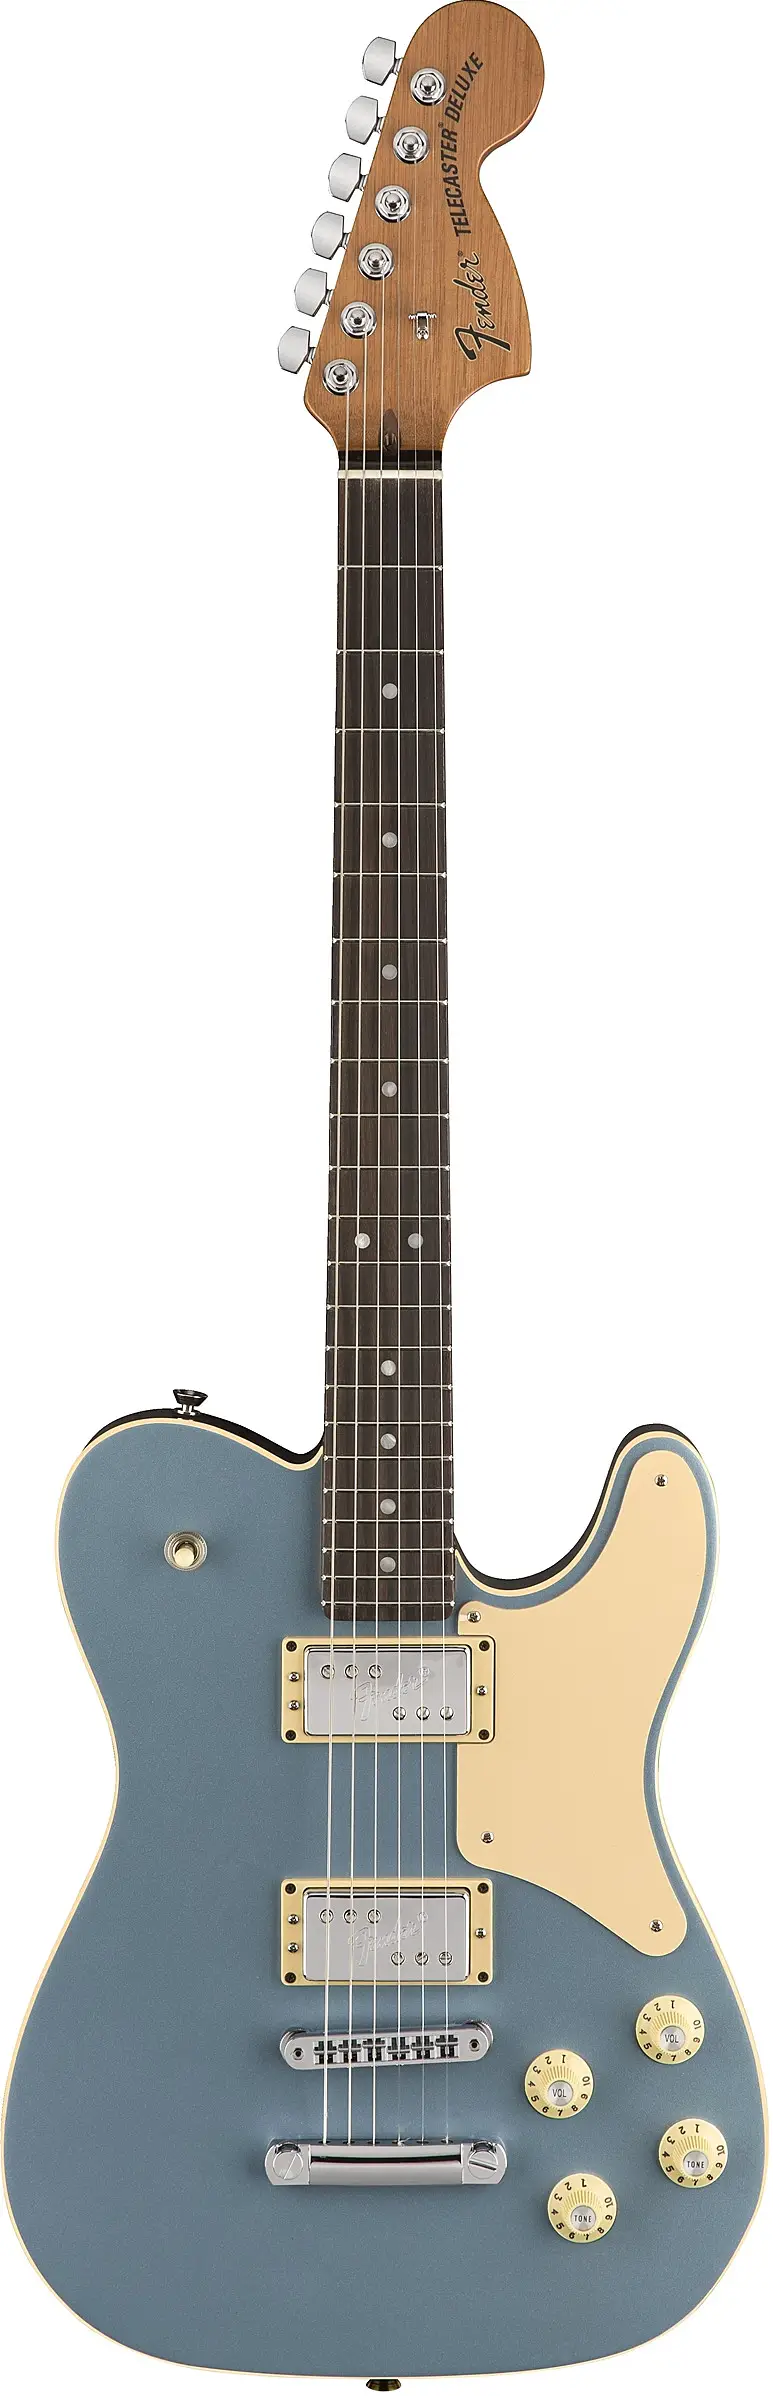 Limited Edition Troublemaker Tele� by Fender